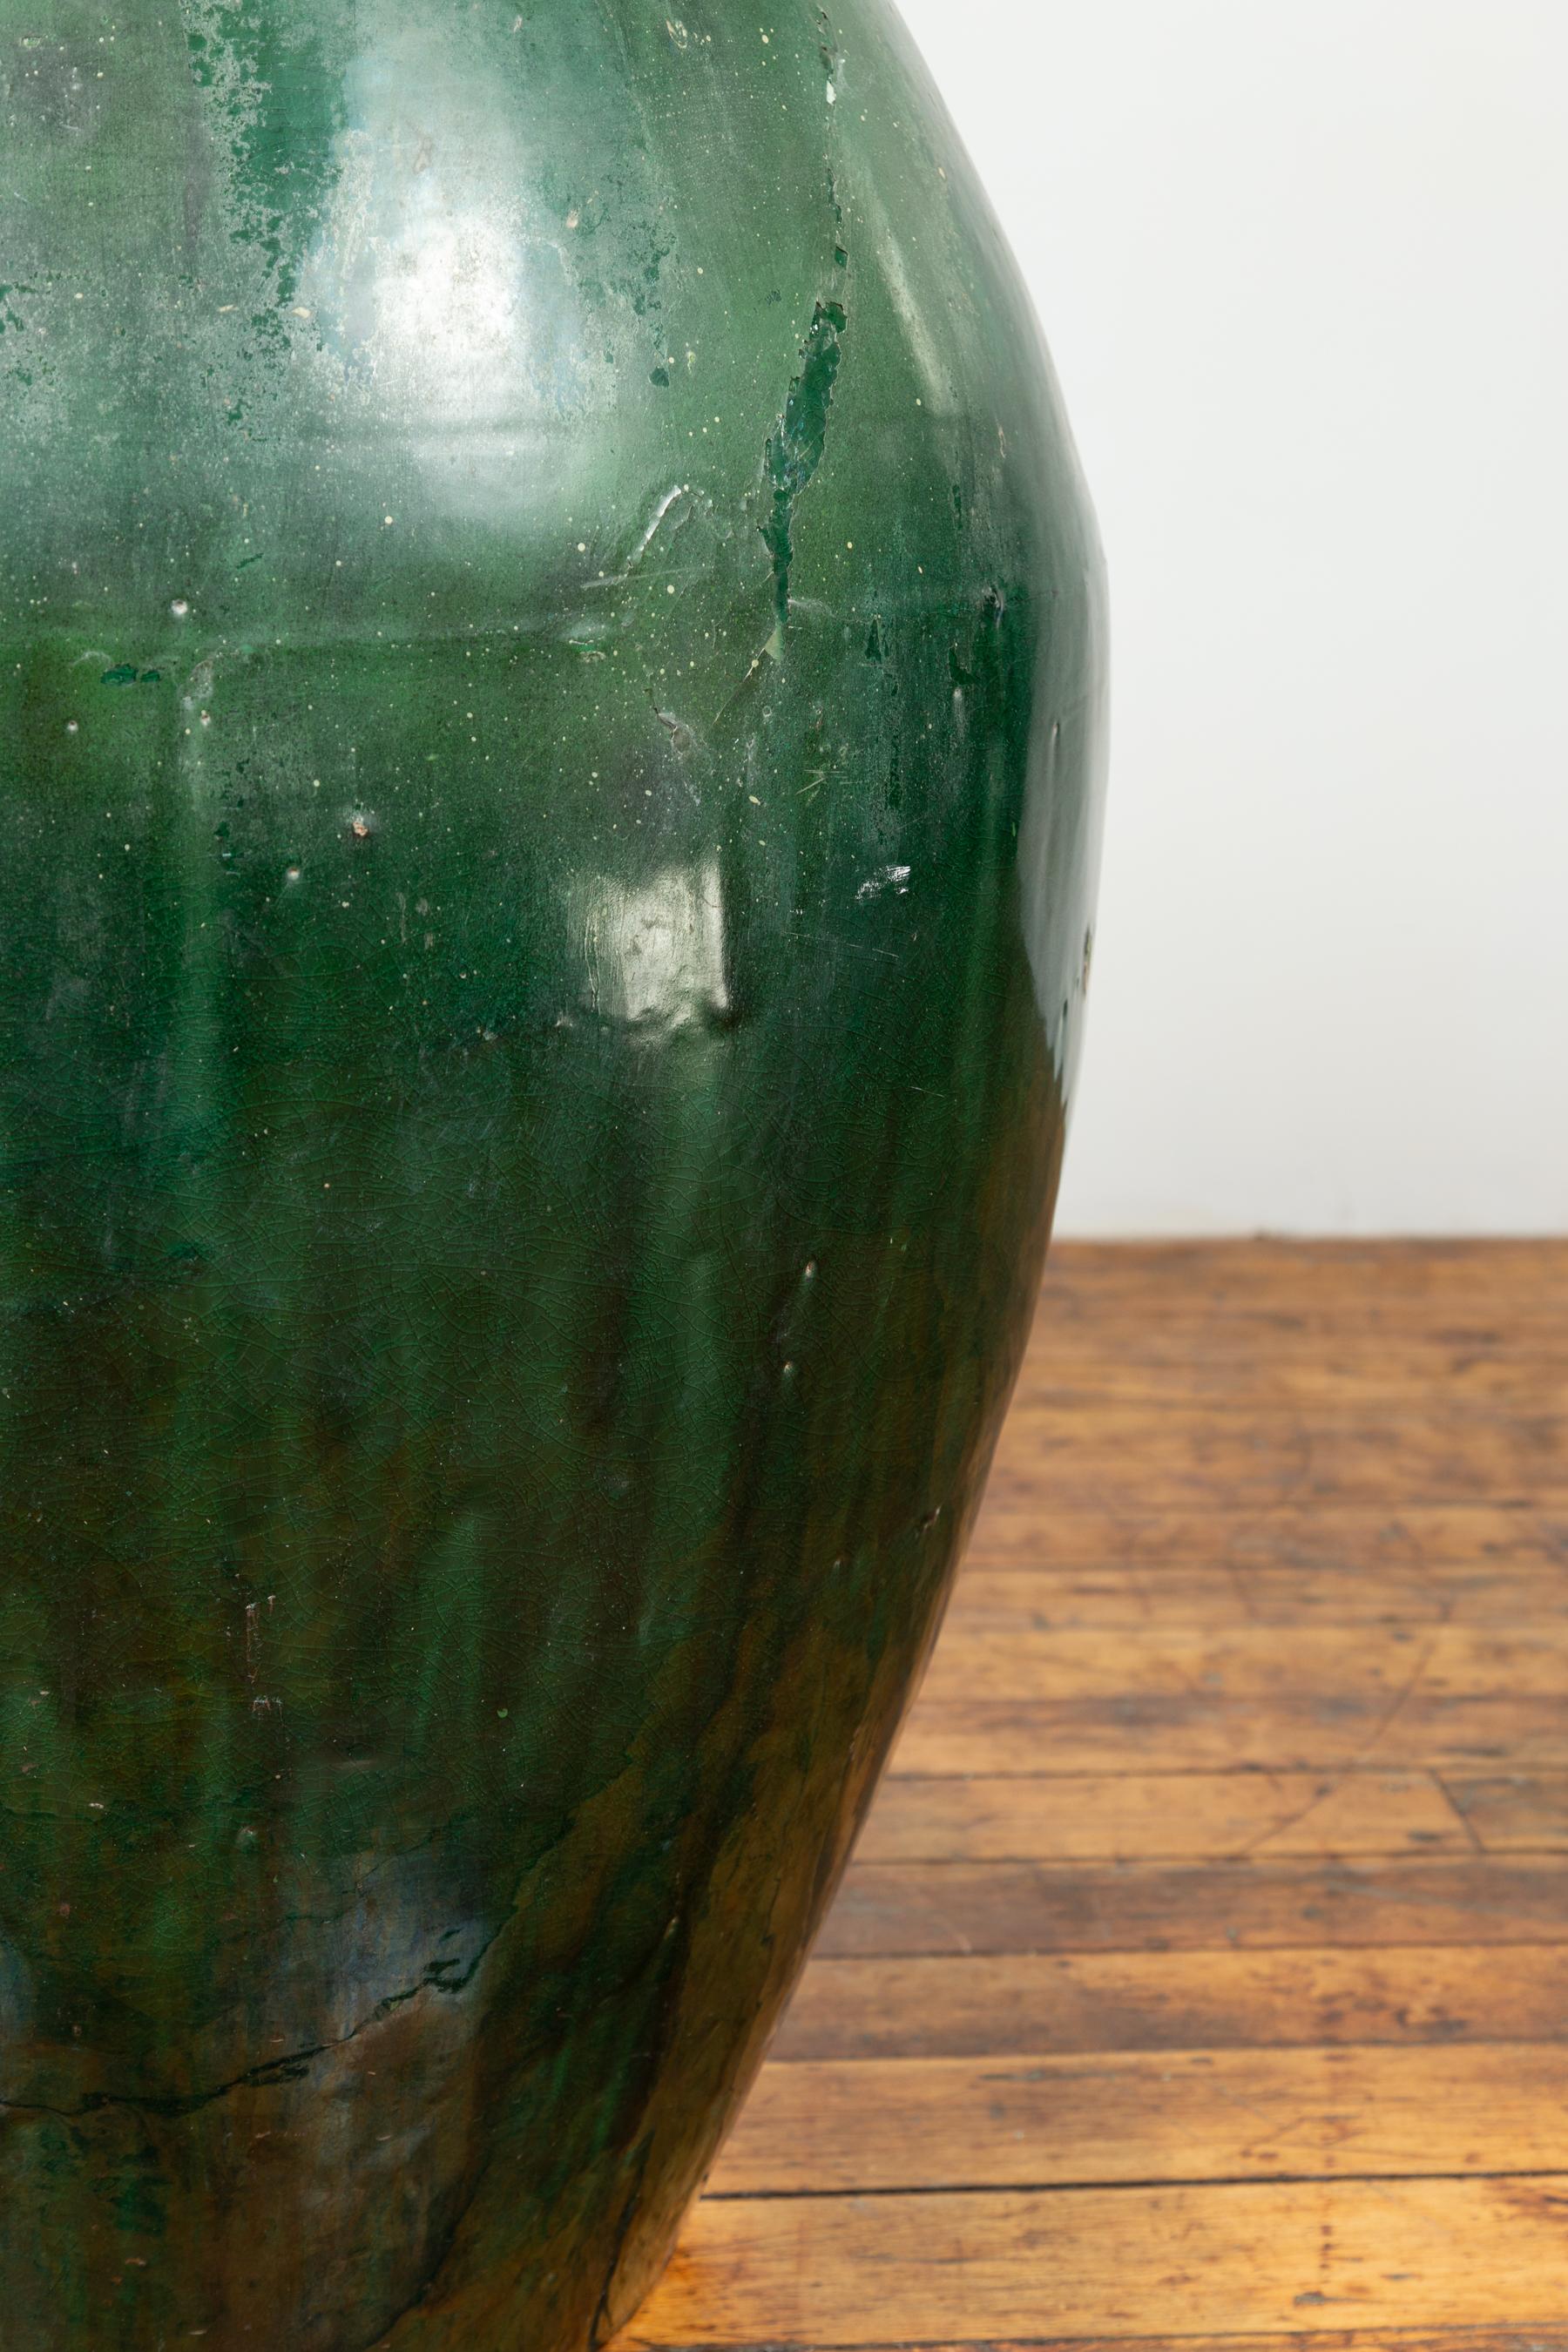 Asian Large Green Glazed Ceramic Jar from the Early 20th Century with Tapering Body For Sale